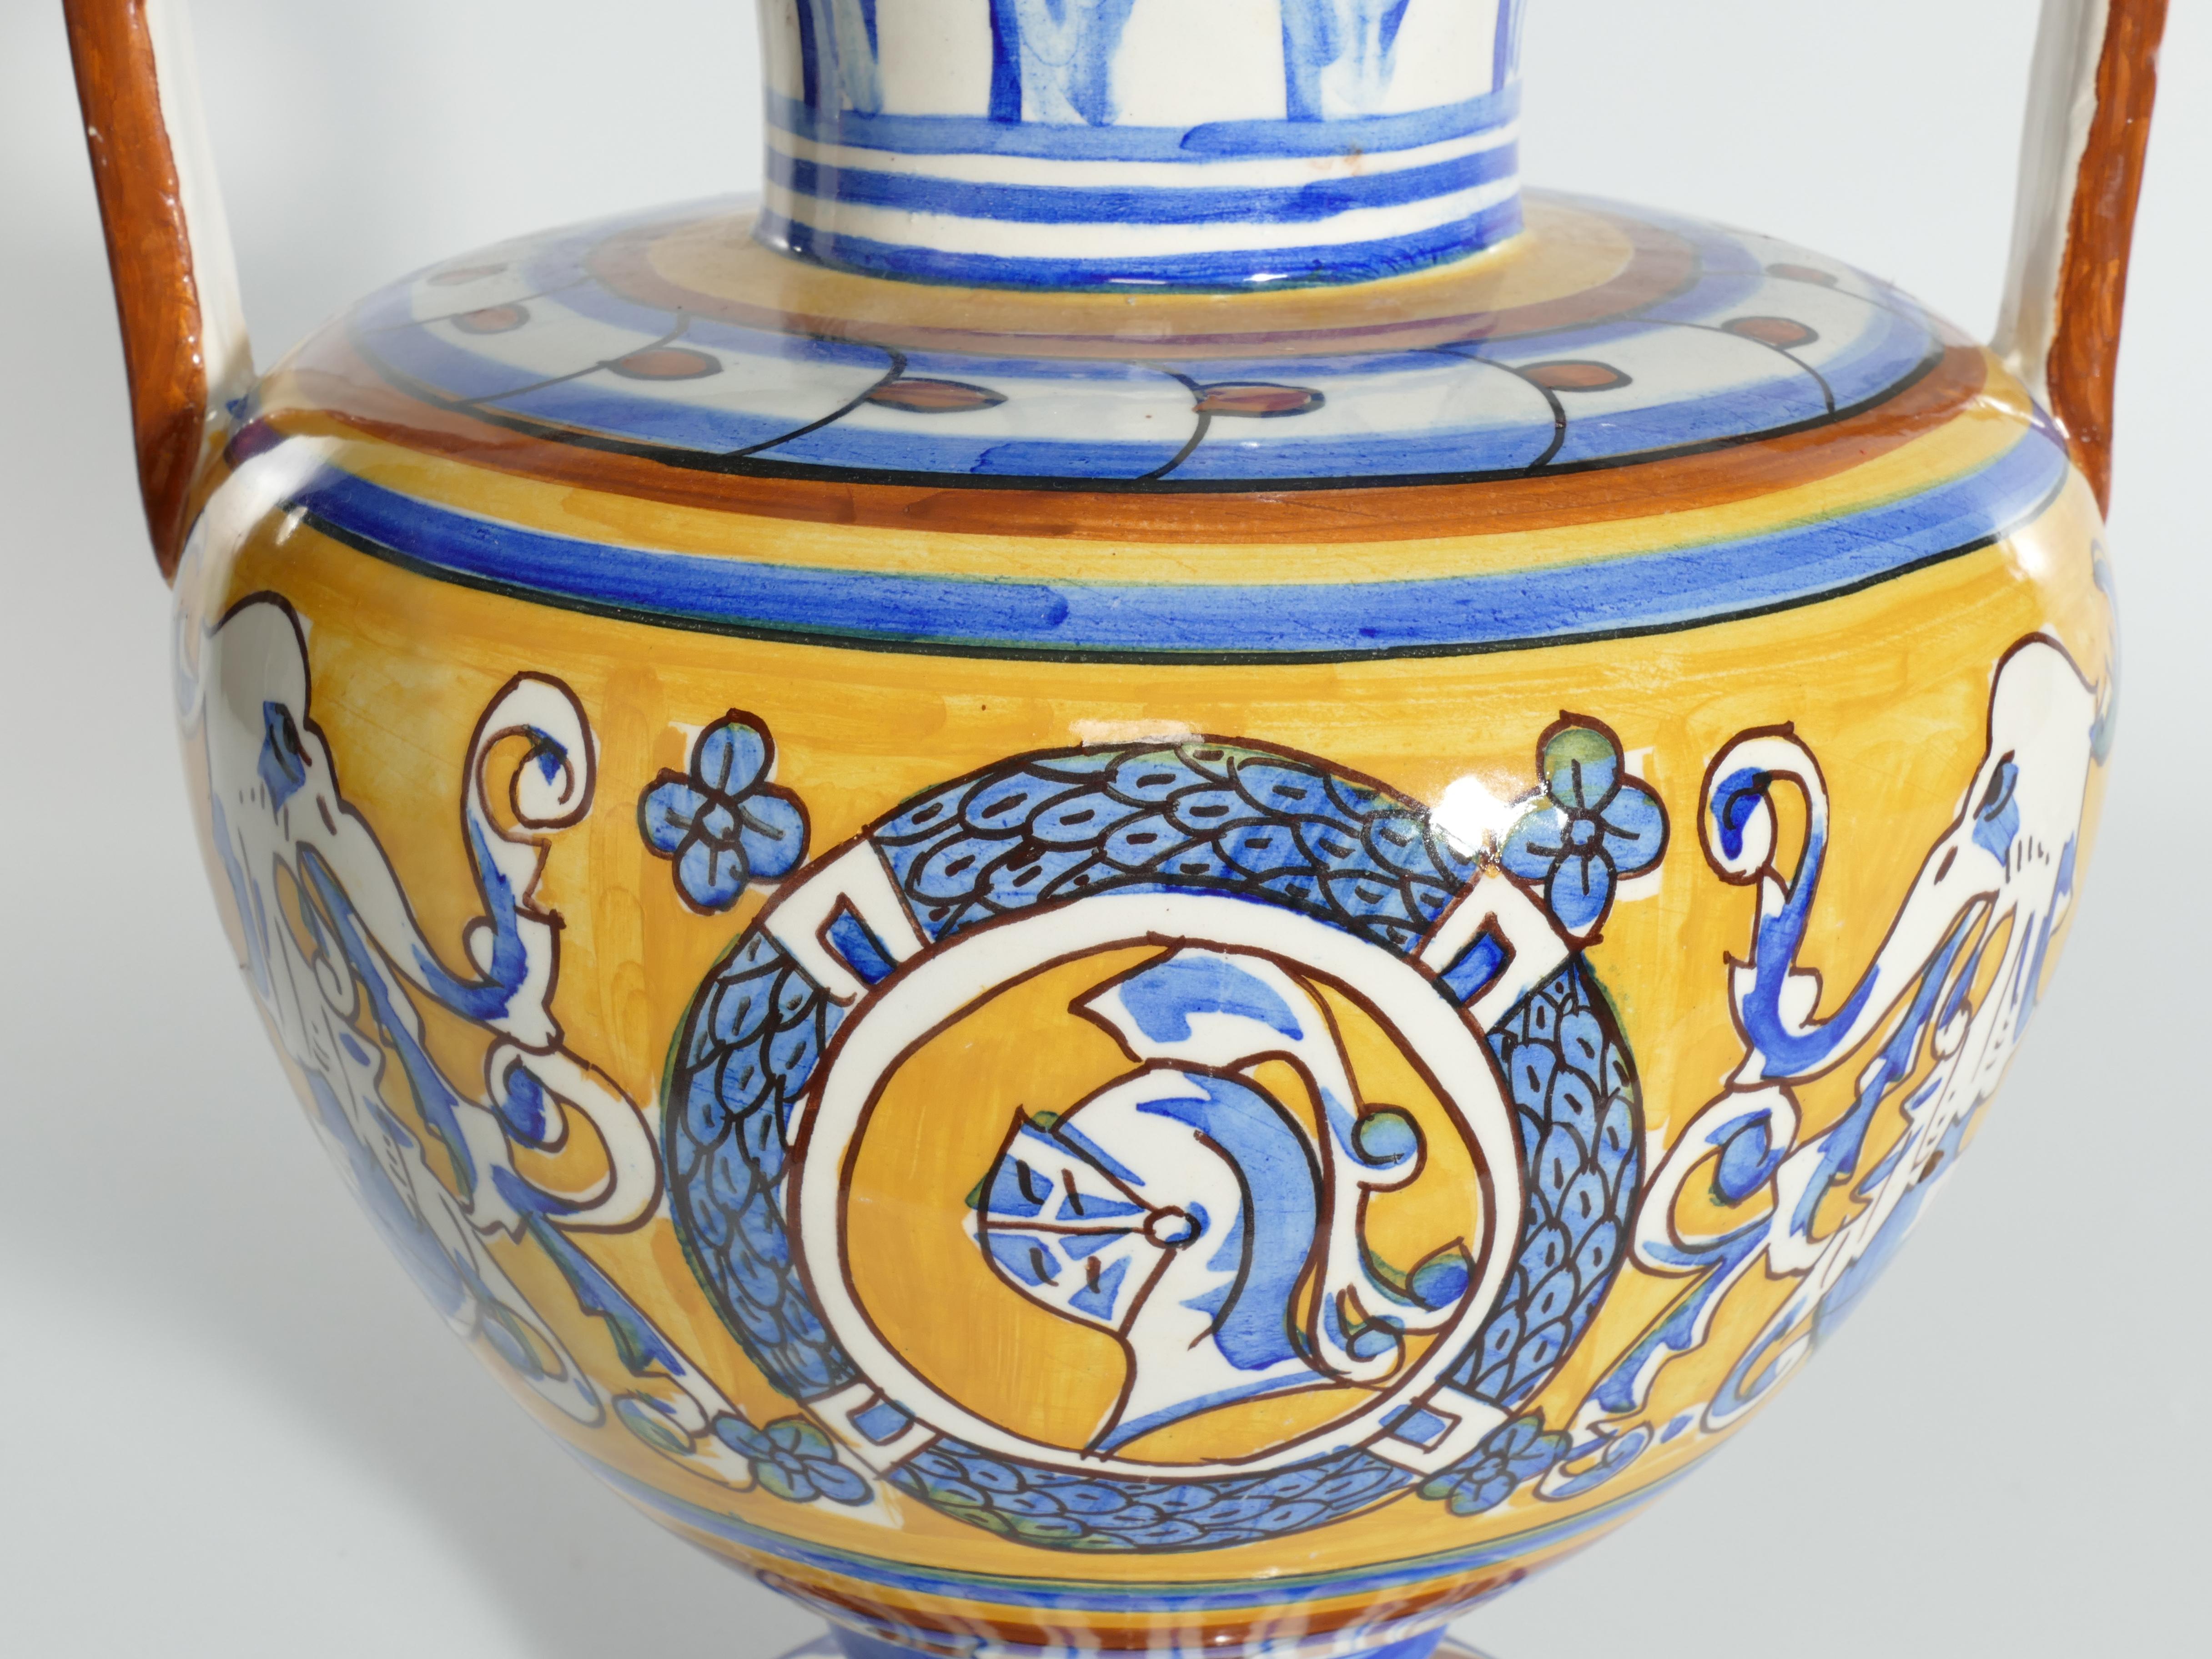 A pair of large absolutely stunning mediterranean vases with hand-painted decoration of a knight and dragons in the traditional colors of yellow, brown and blue. Exceptional handles with detailed figures. 

These remarkable handle vases look